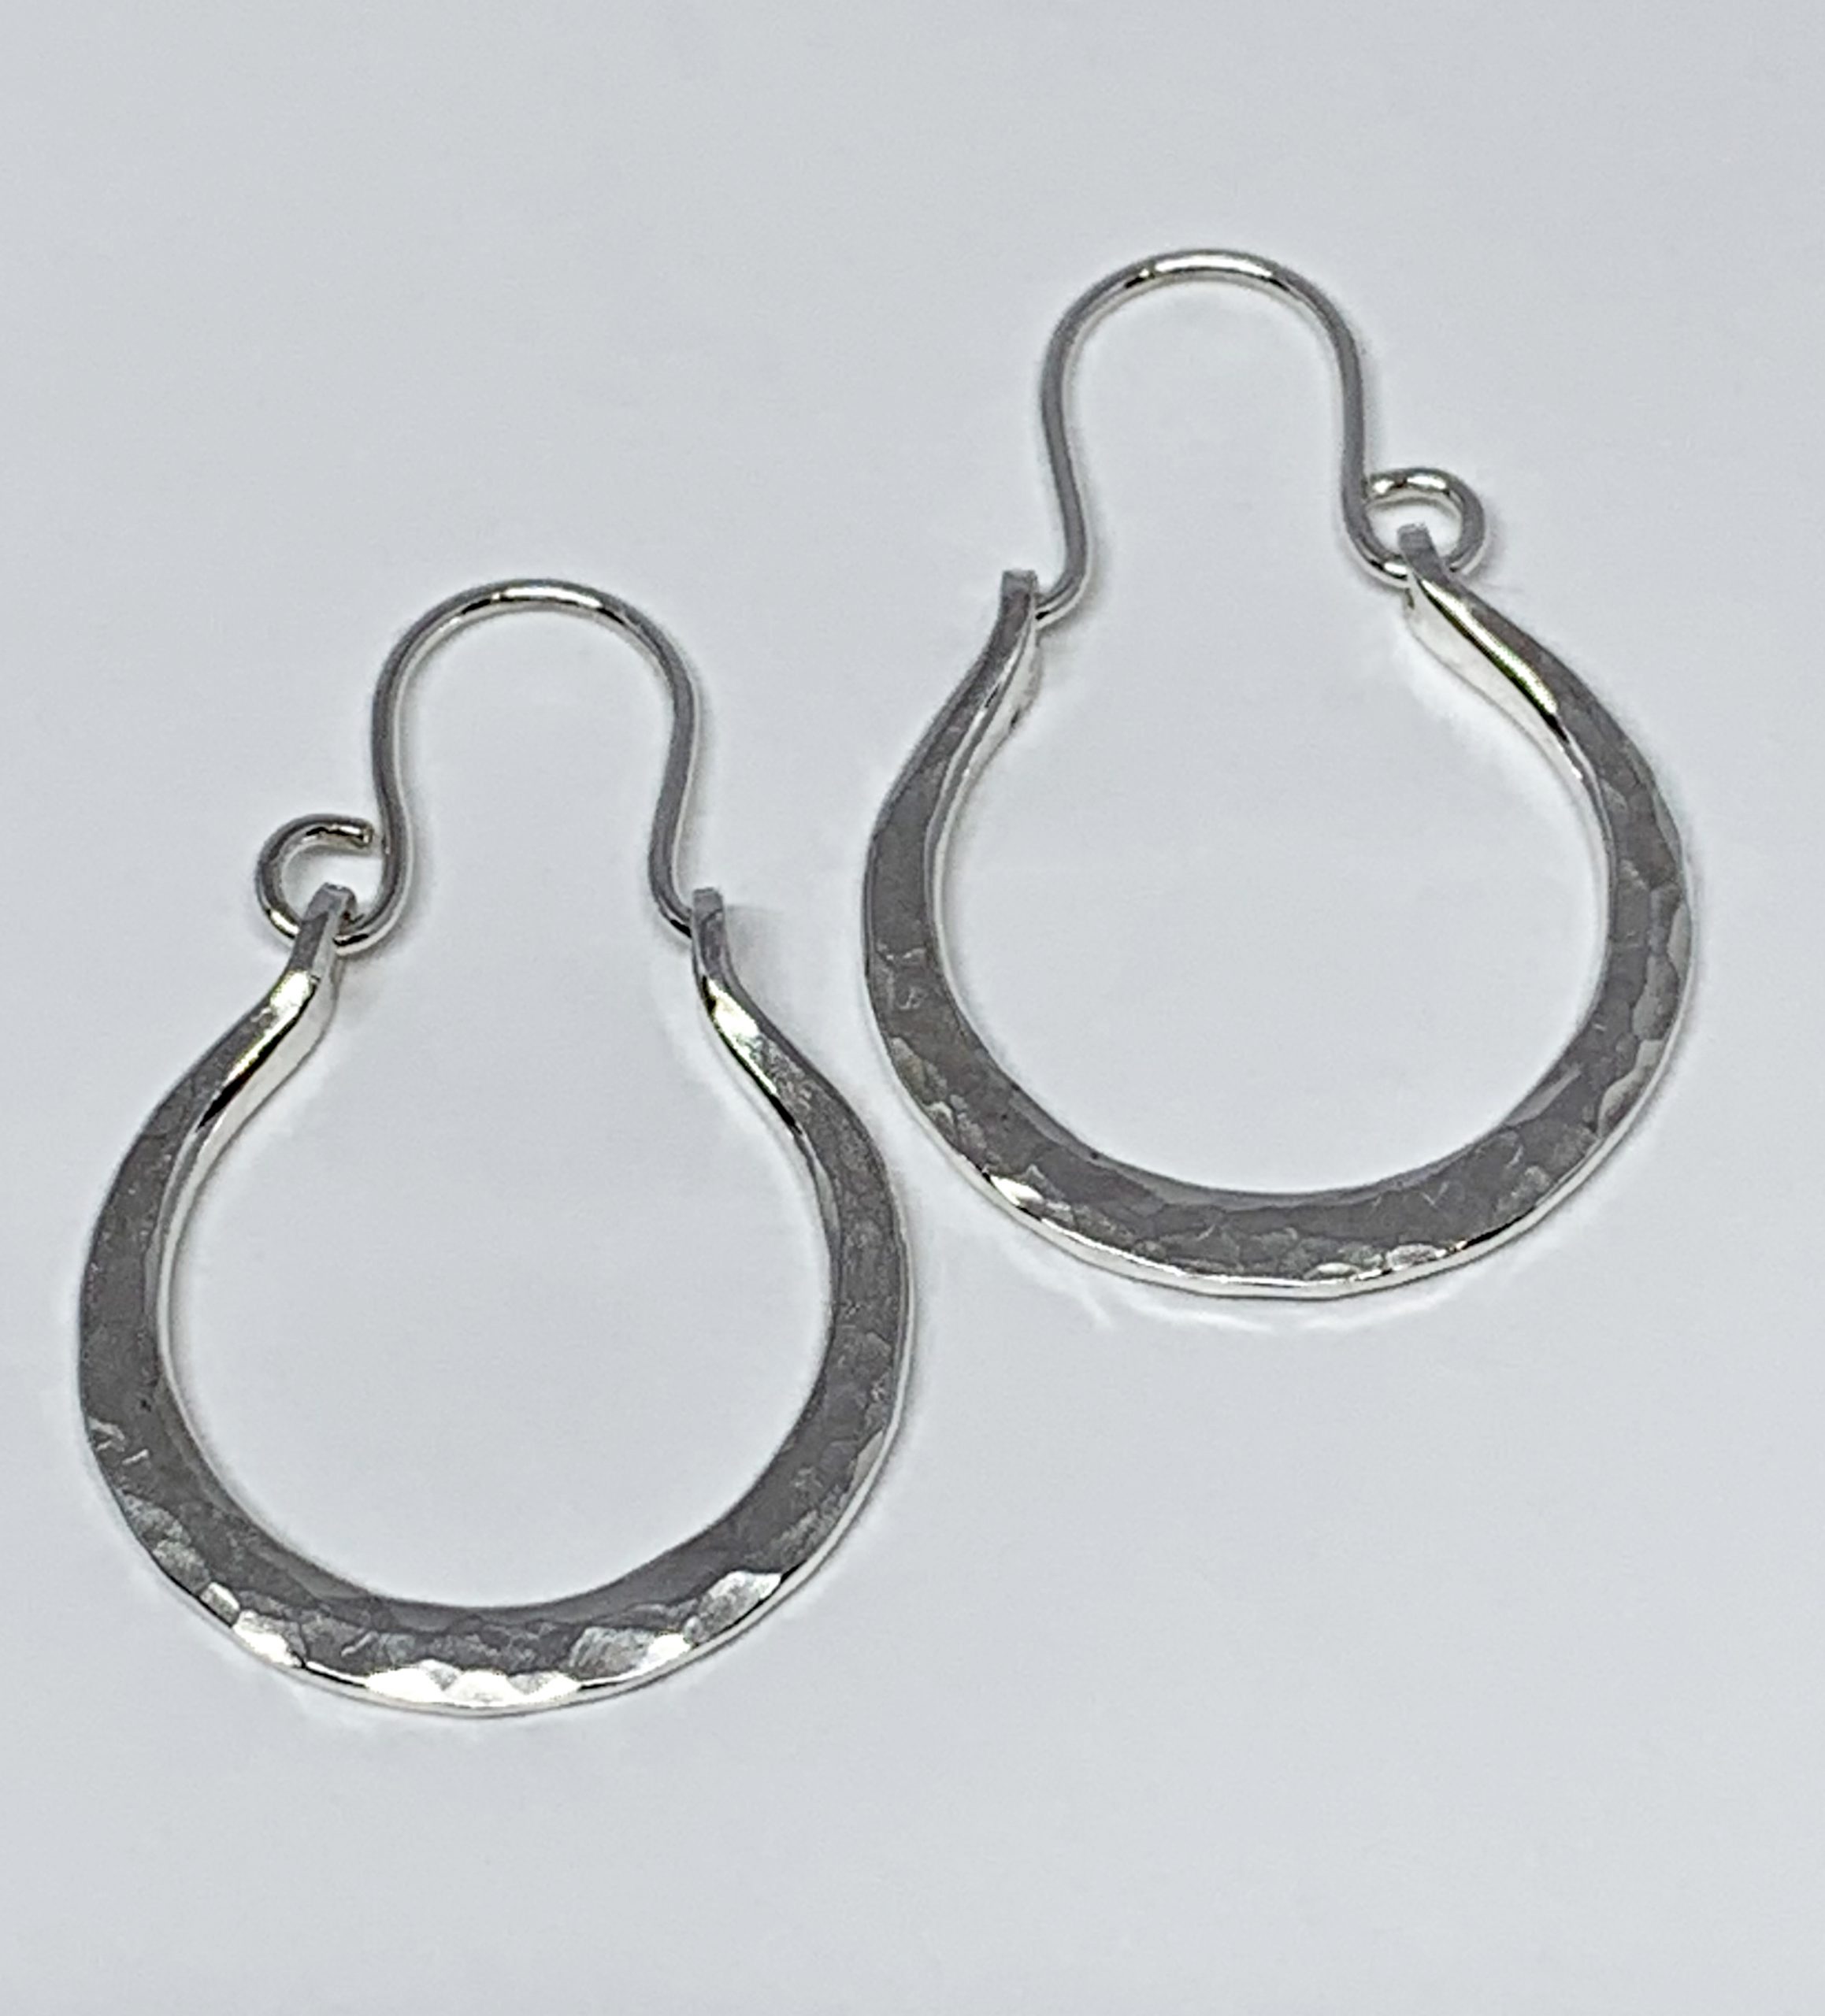 Sterling silver earrings by A&R Jewellery | Effusion Art Gallery + Cast Glass Studio, Invermere BC